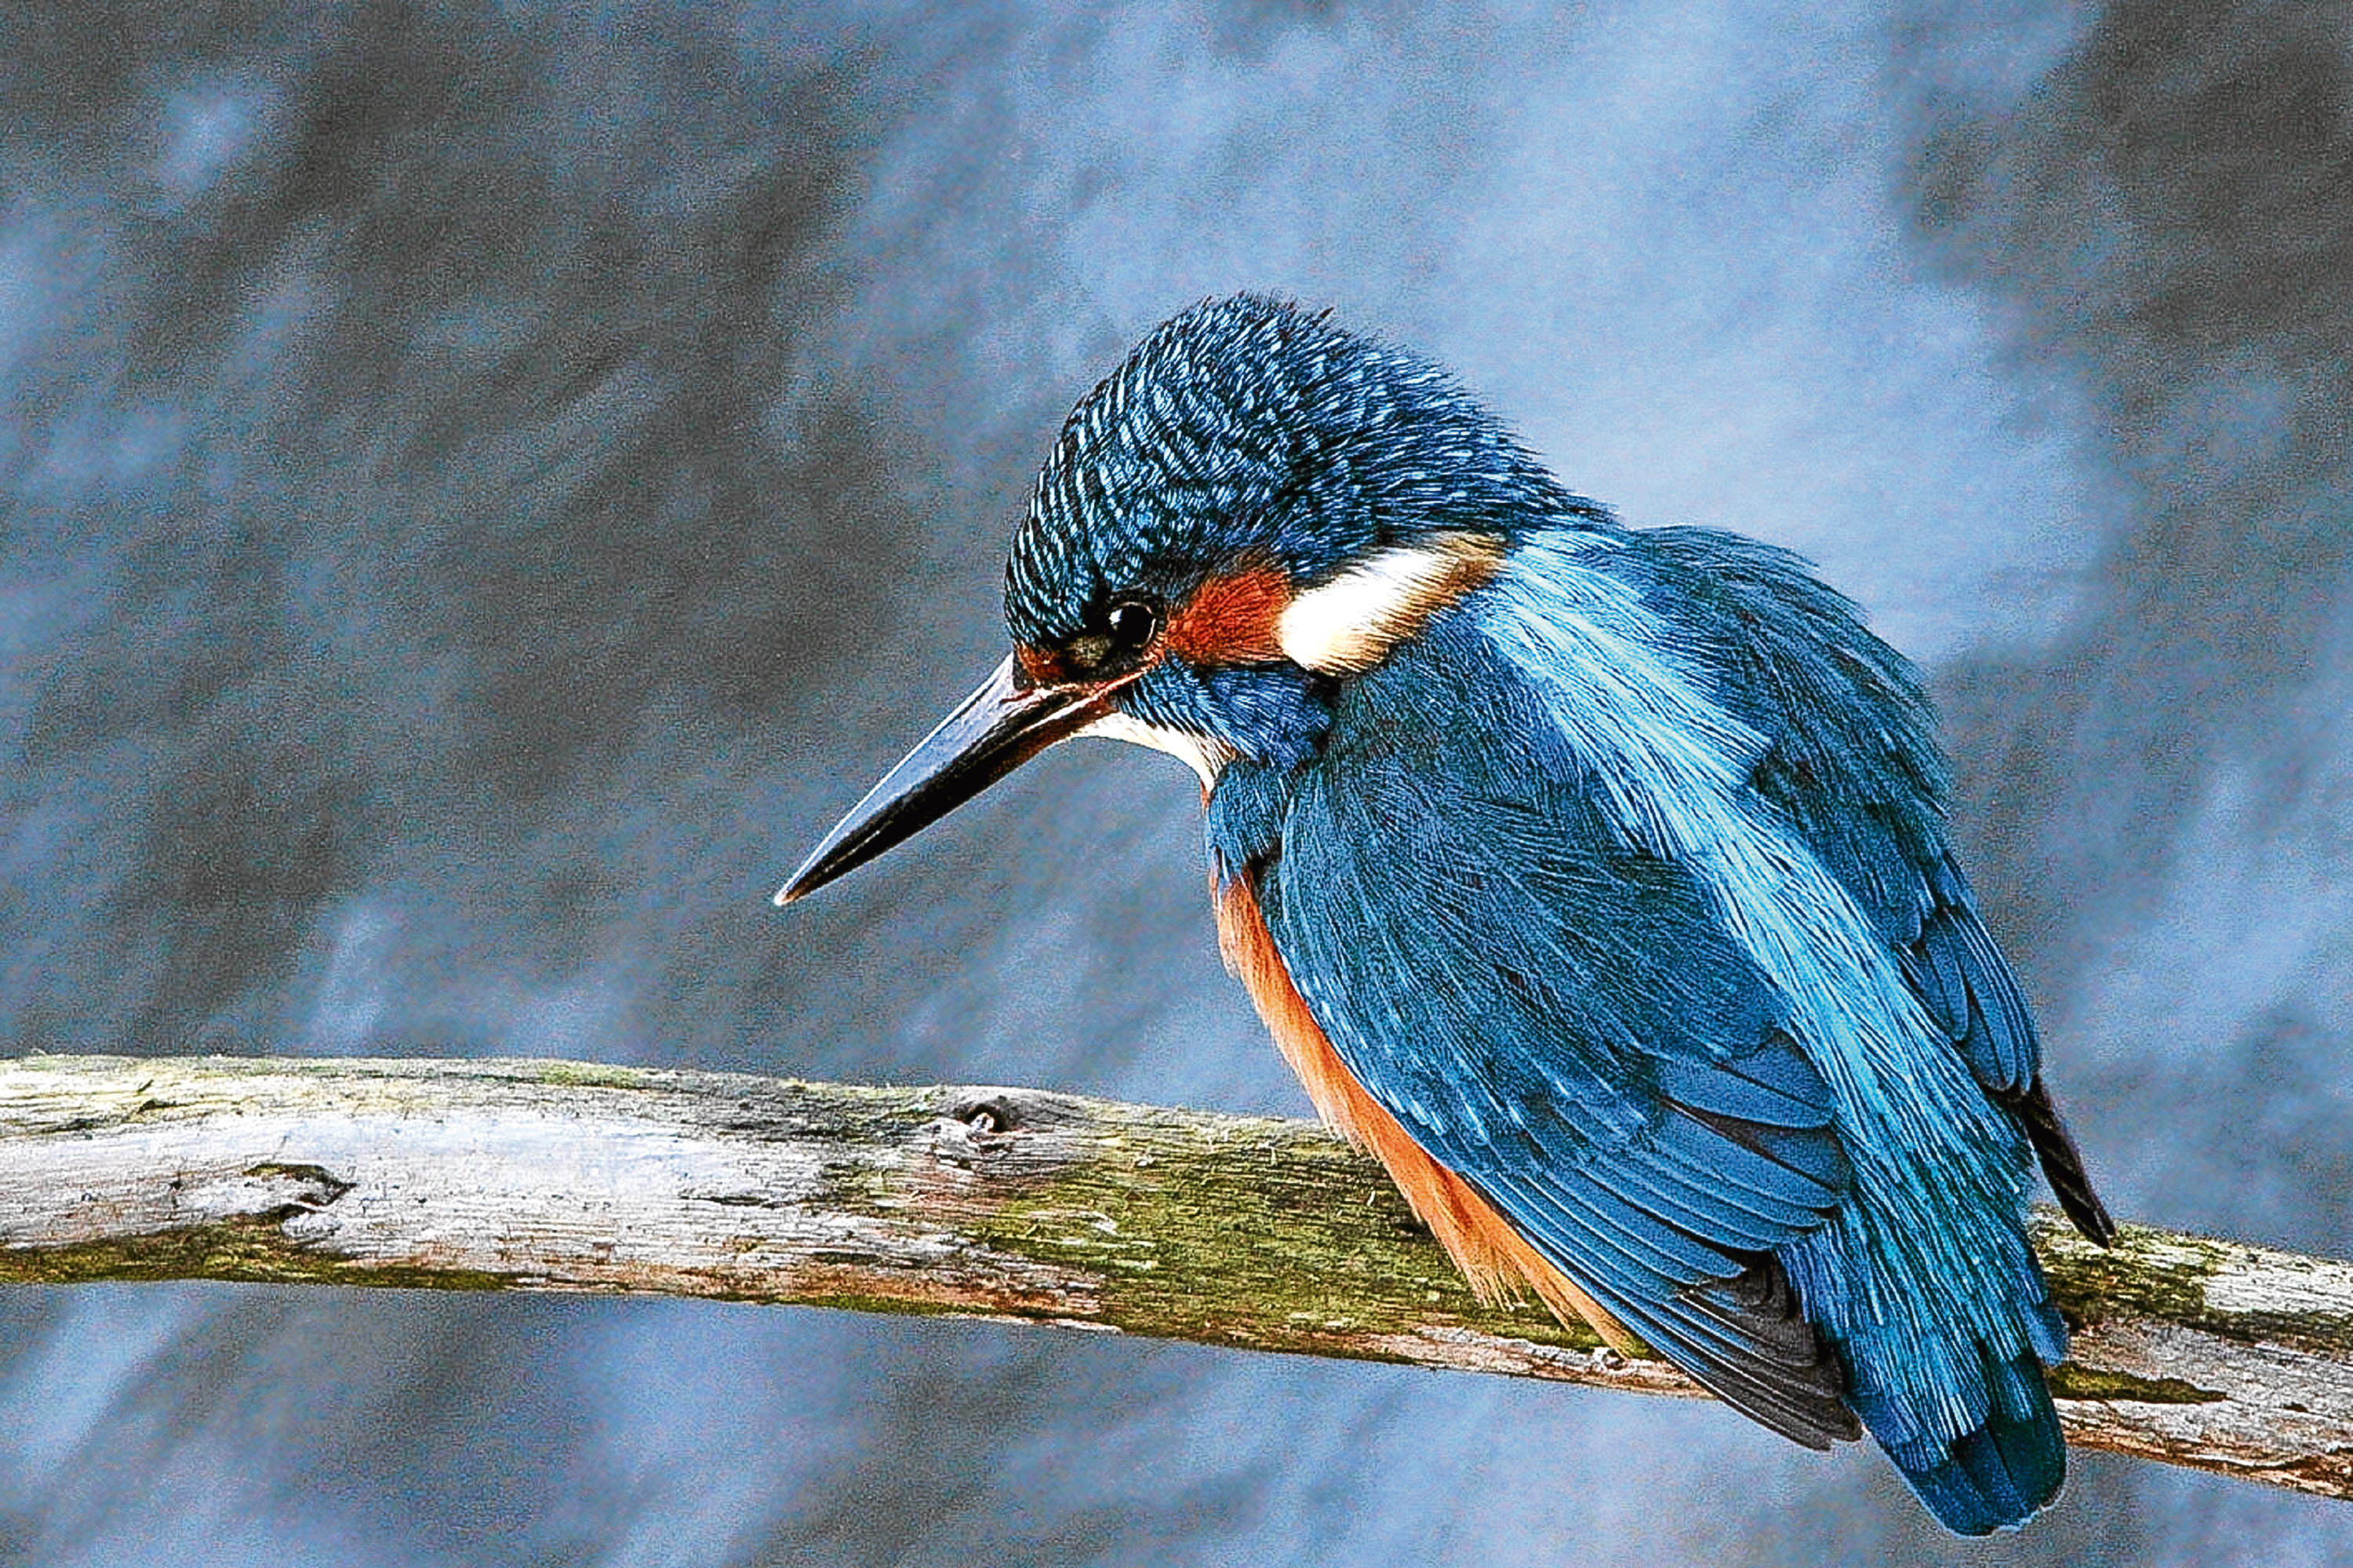 Jim has been captivated by the kingfisher's remarkable colours.